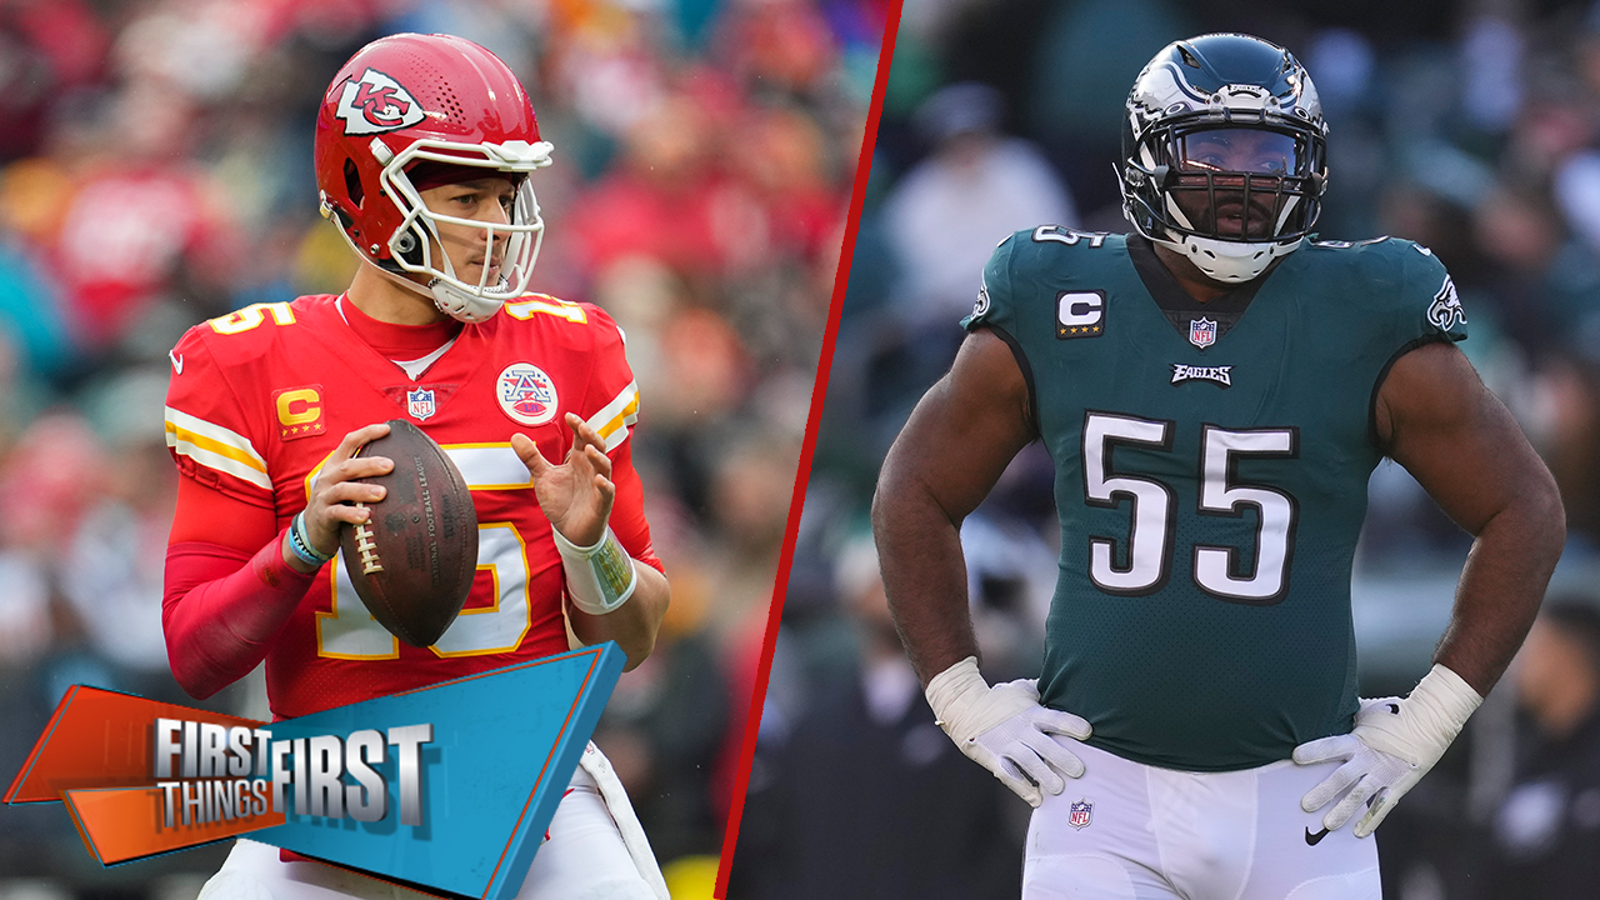 Eagles DE Brandon Graham on facing Mahomes: 'you can't play scared'